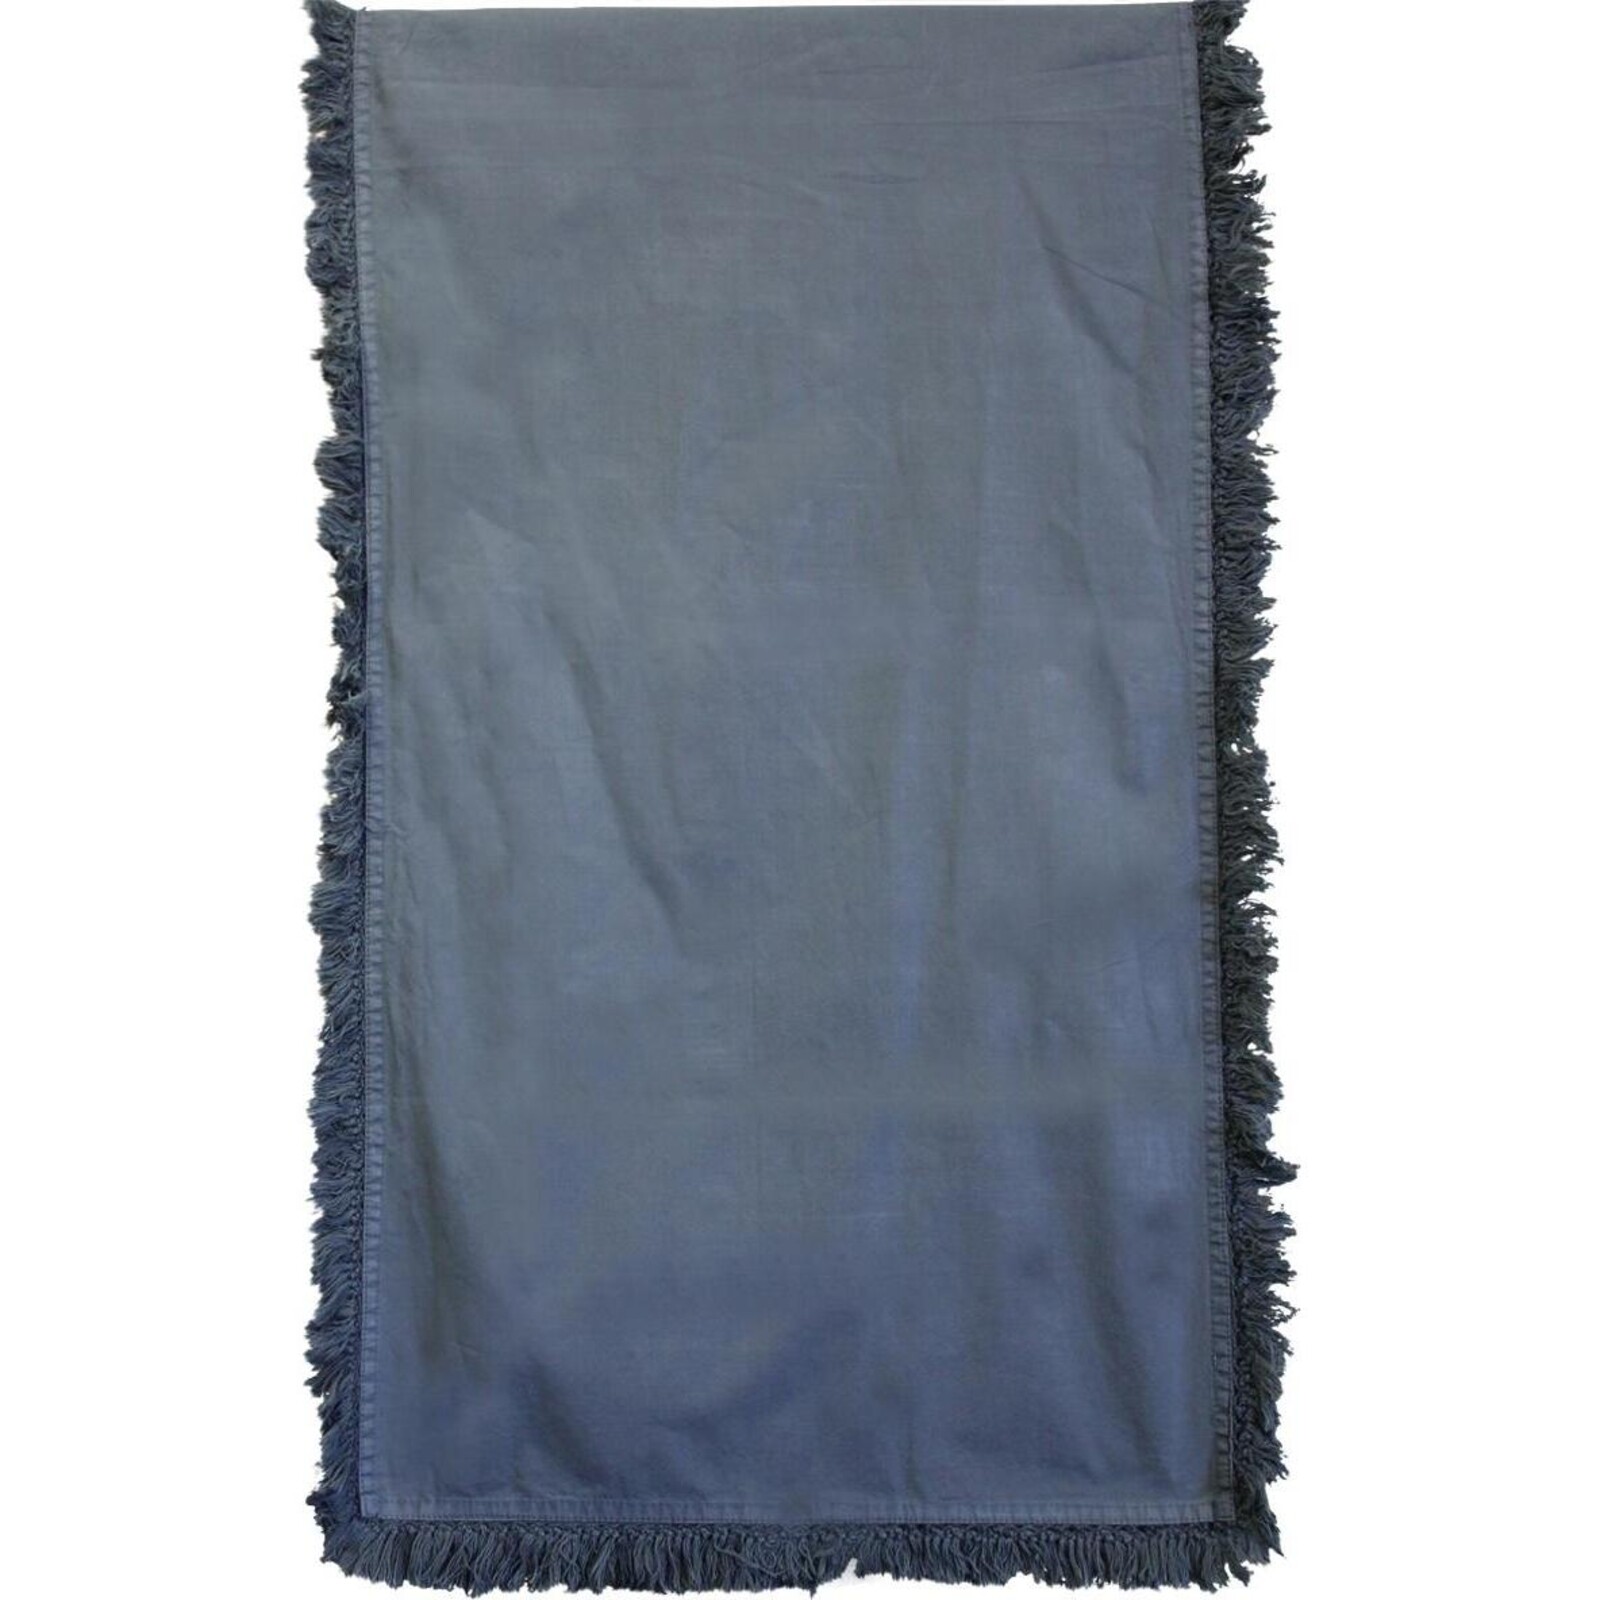 Table Runner Stone Washed Cotton w/ Fringe Charcoal